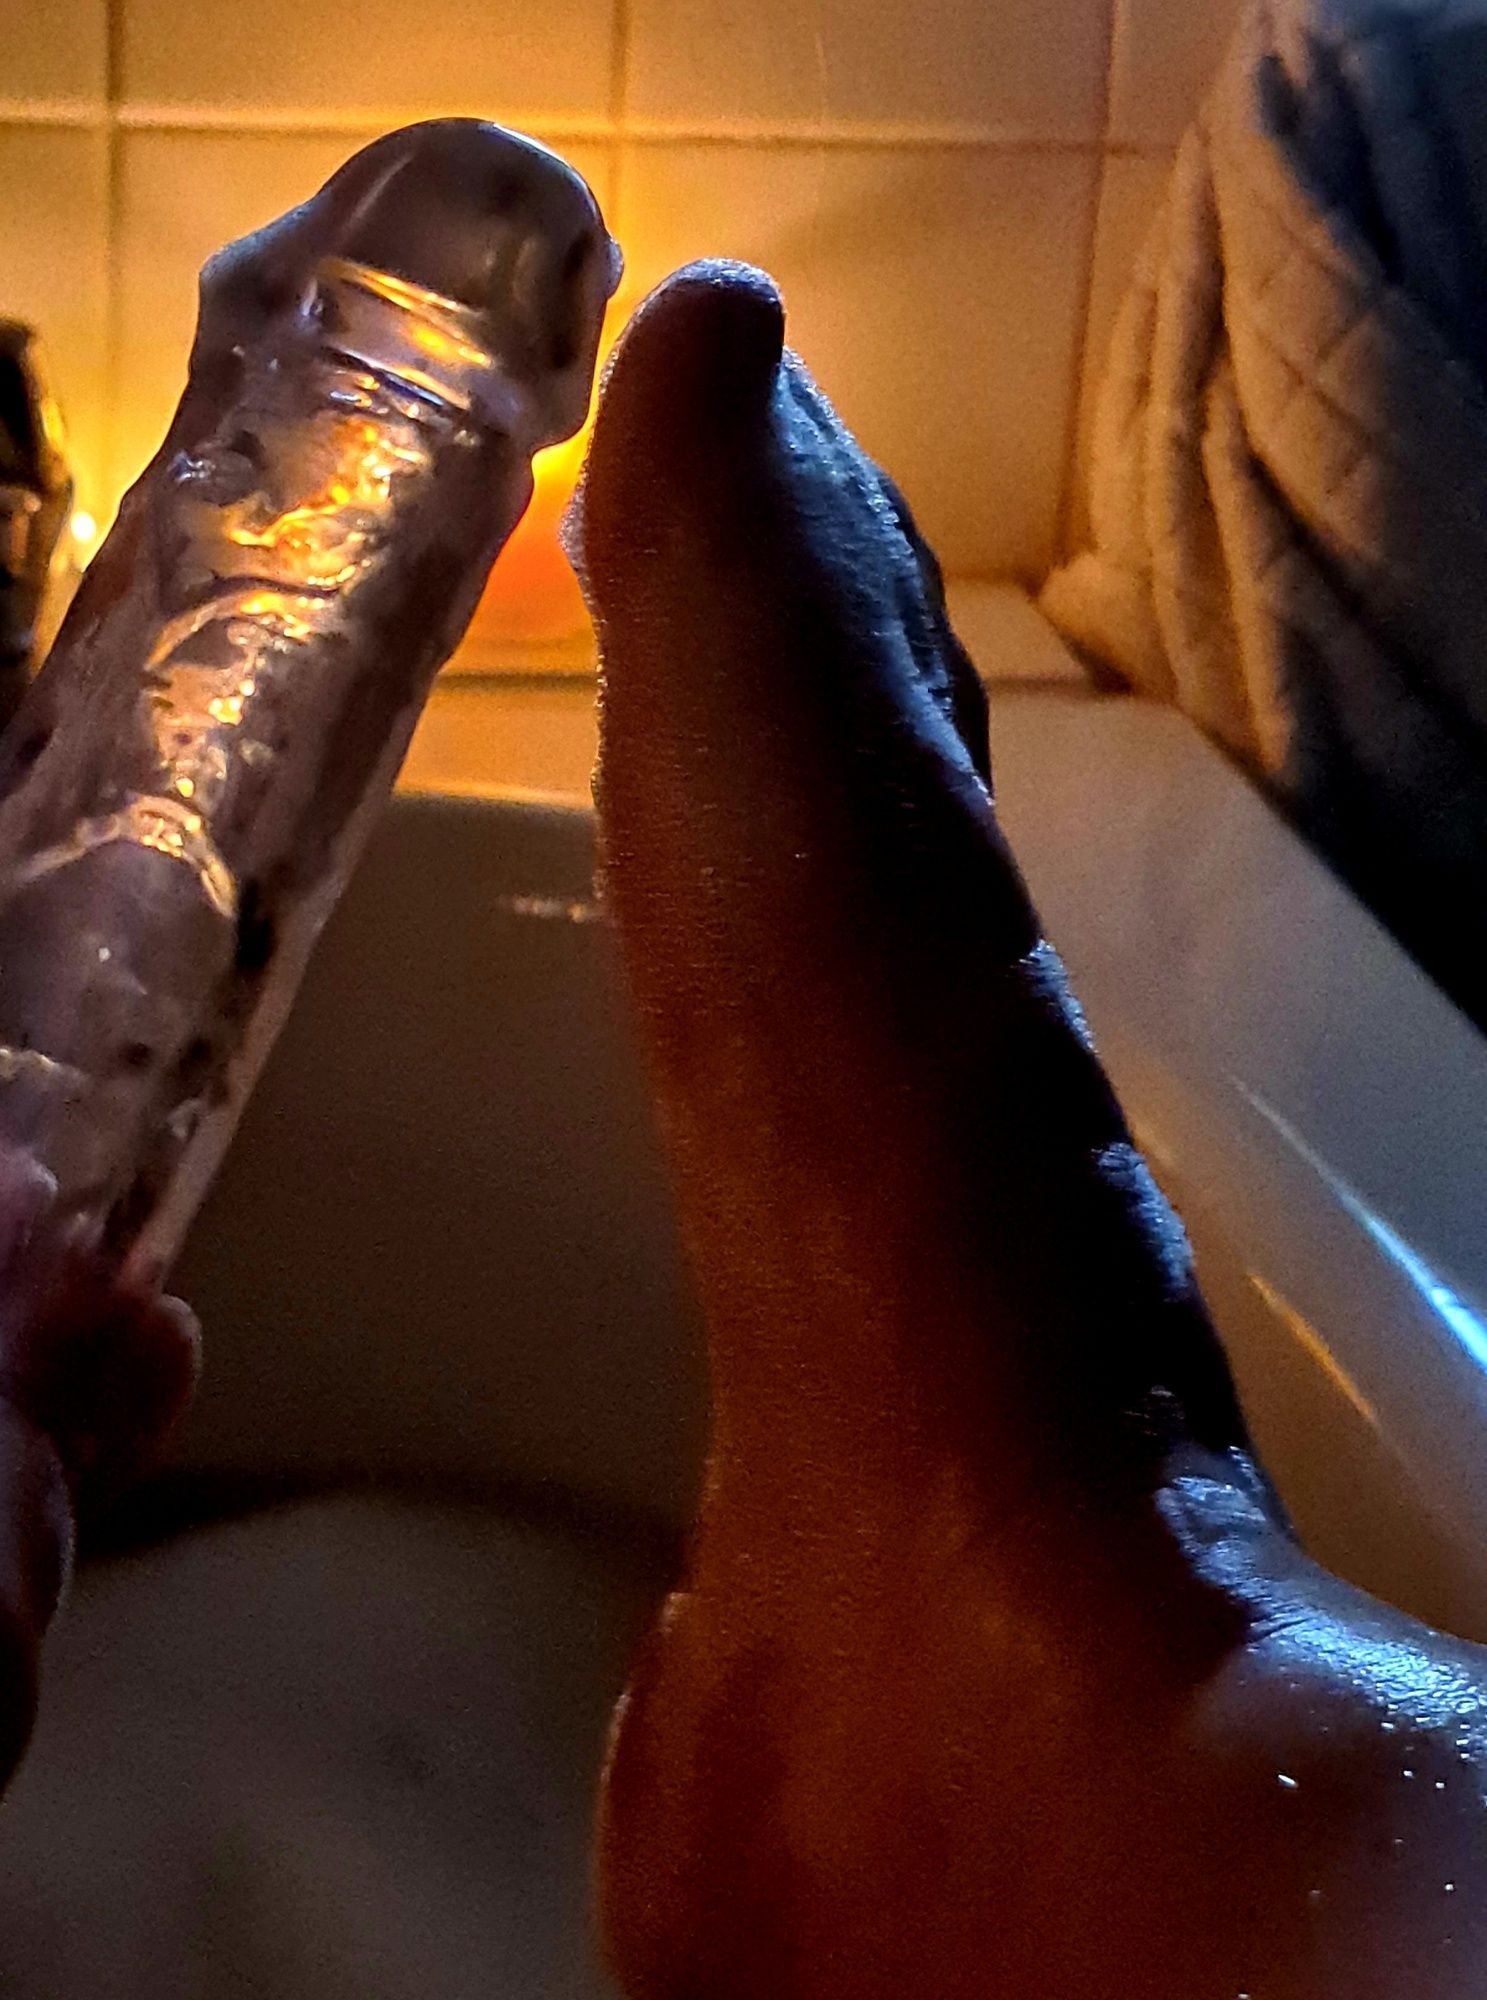 Foot and sextoy . Bathtime #4